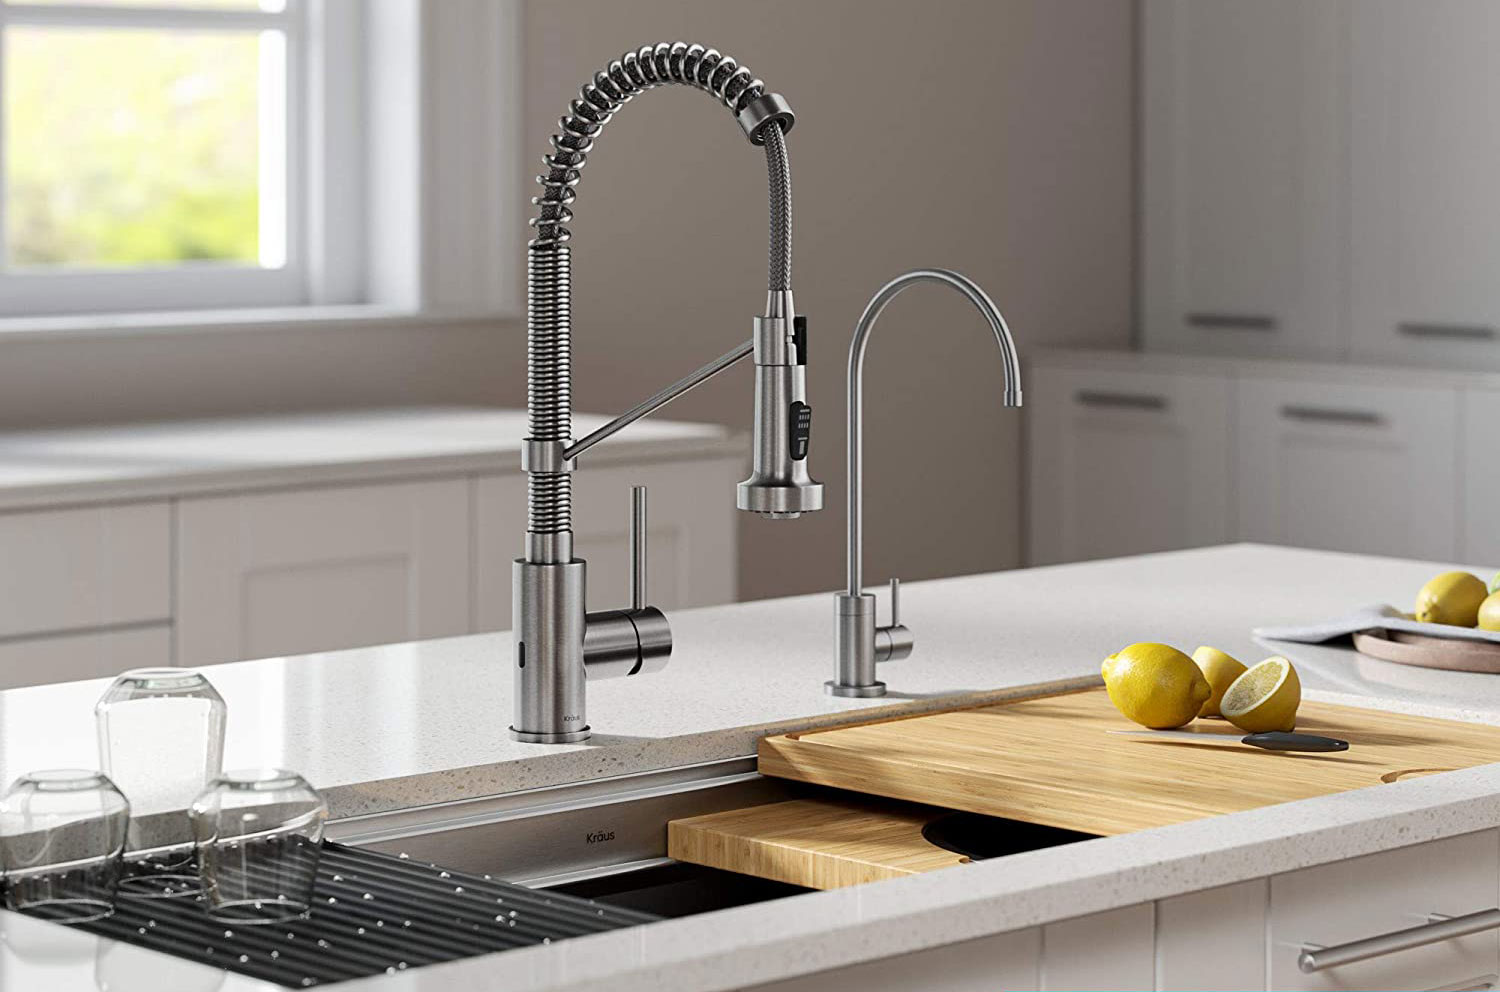 Top 10 Kitchen Sink Faucets that are compatible with Smart Touch 41587 - Top 10 Kitchen Sink Faucets that are compatible with Smart Touch